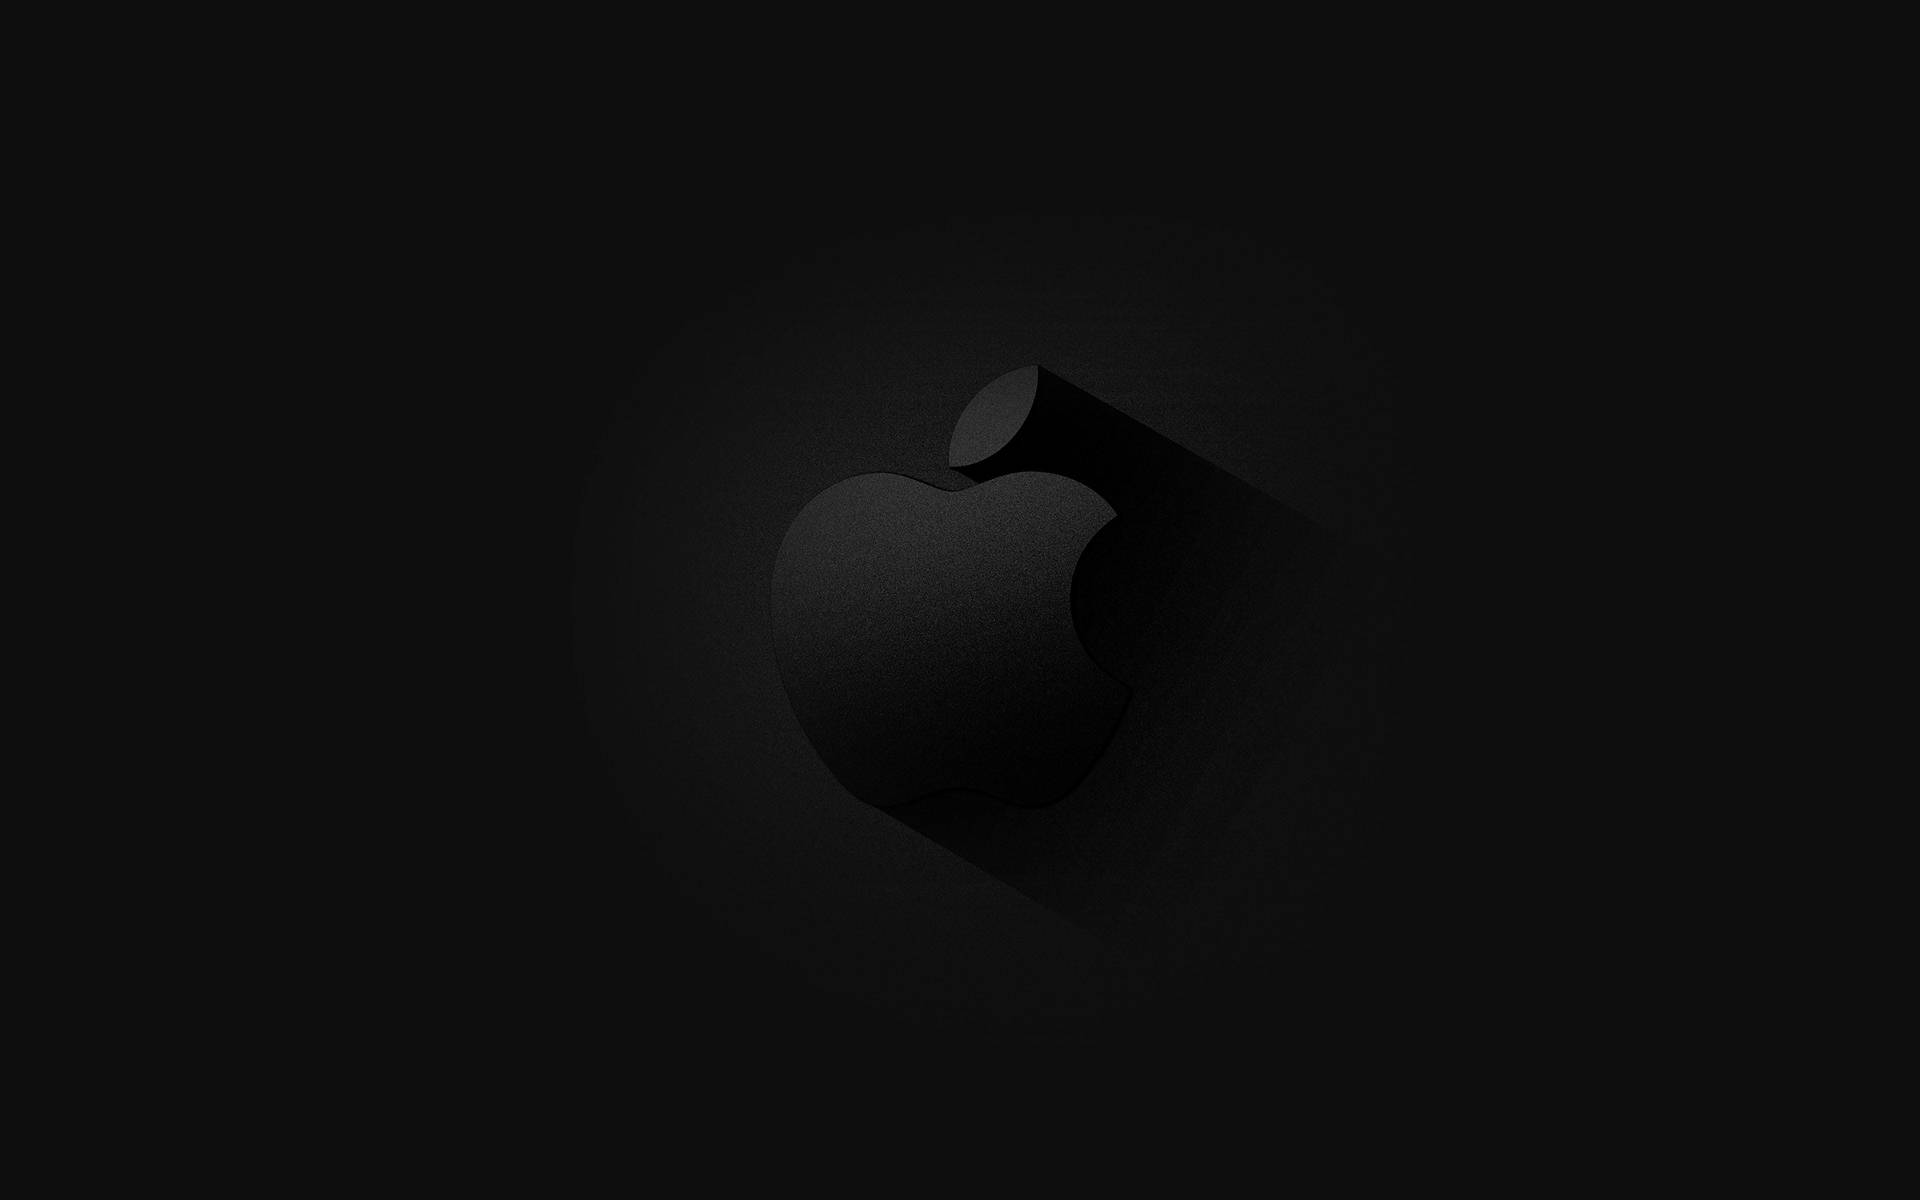 Background Black With Apple Logo Picture